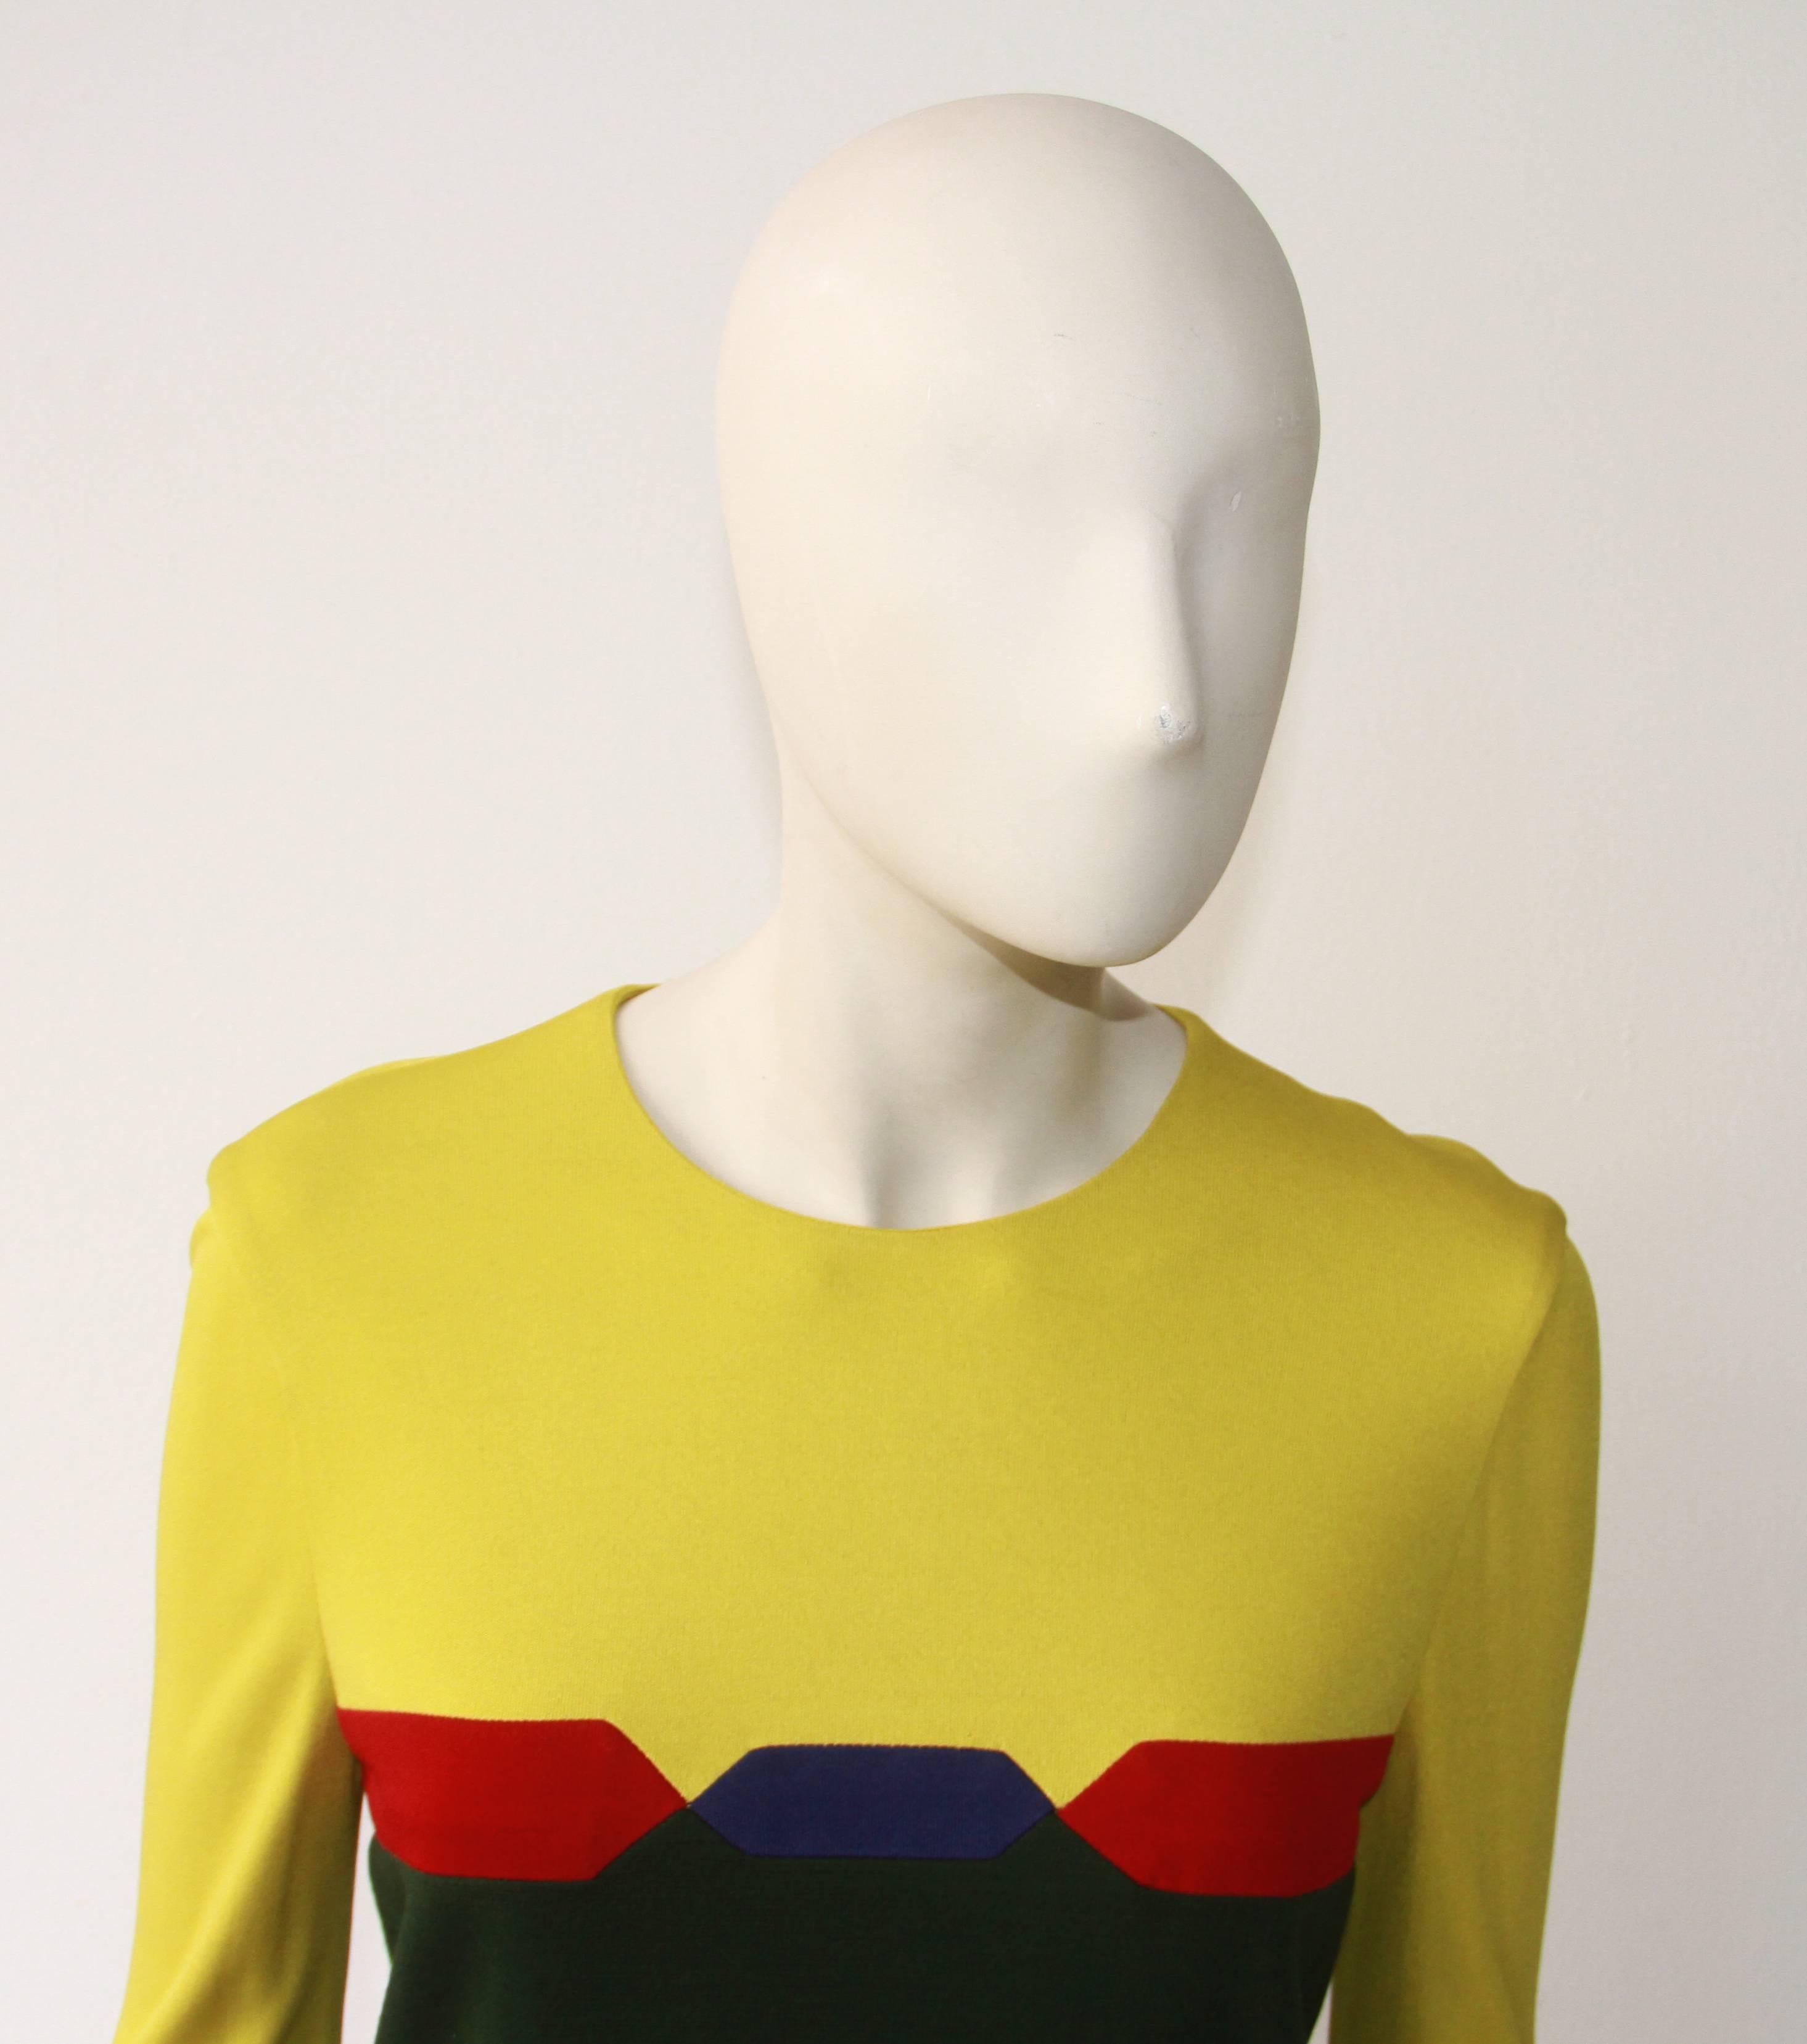 Gianni Versace colour-blocked long sleeved dress from the Fall 1997 collection.

Marked an Italian size 40.

Manufacturer - Alias S.p.a.

Fabric content - 48% wool / 41% rayon / 7% acetate / 4% nylon